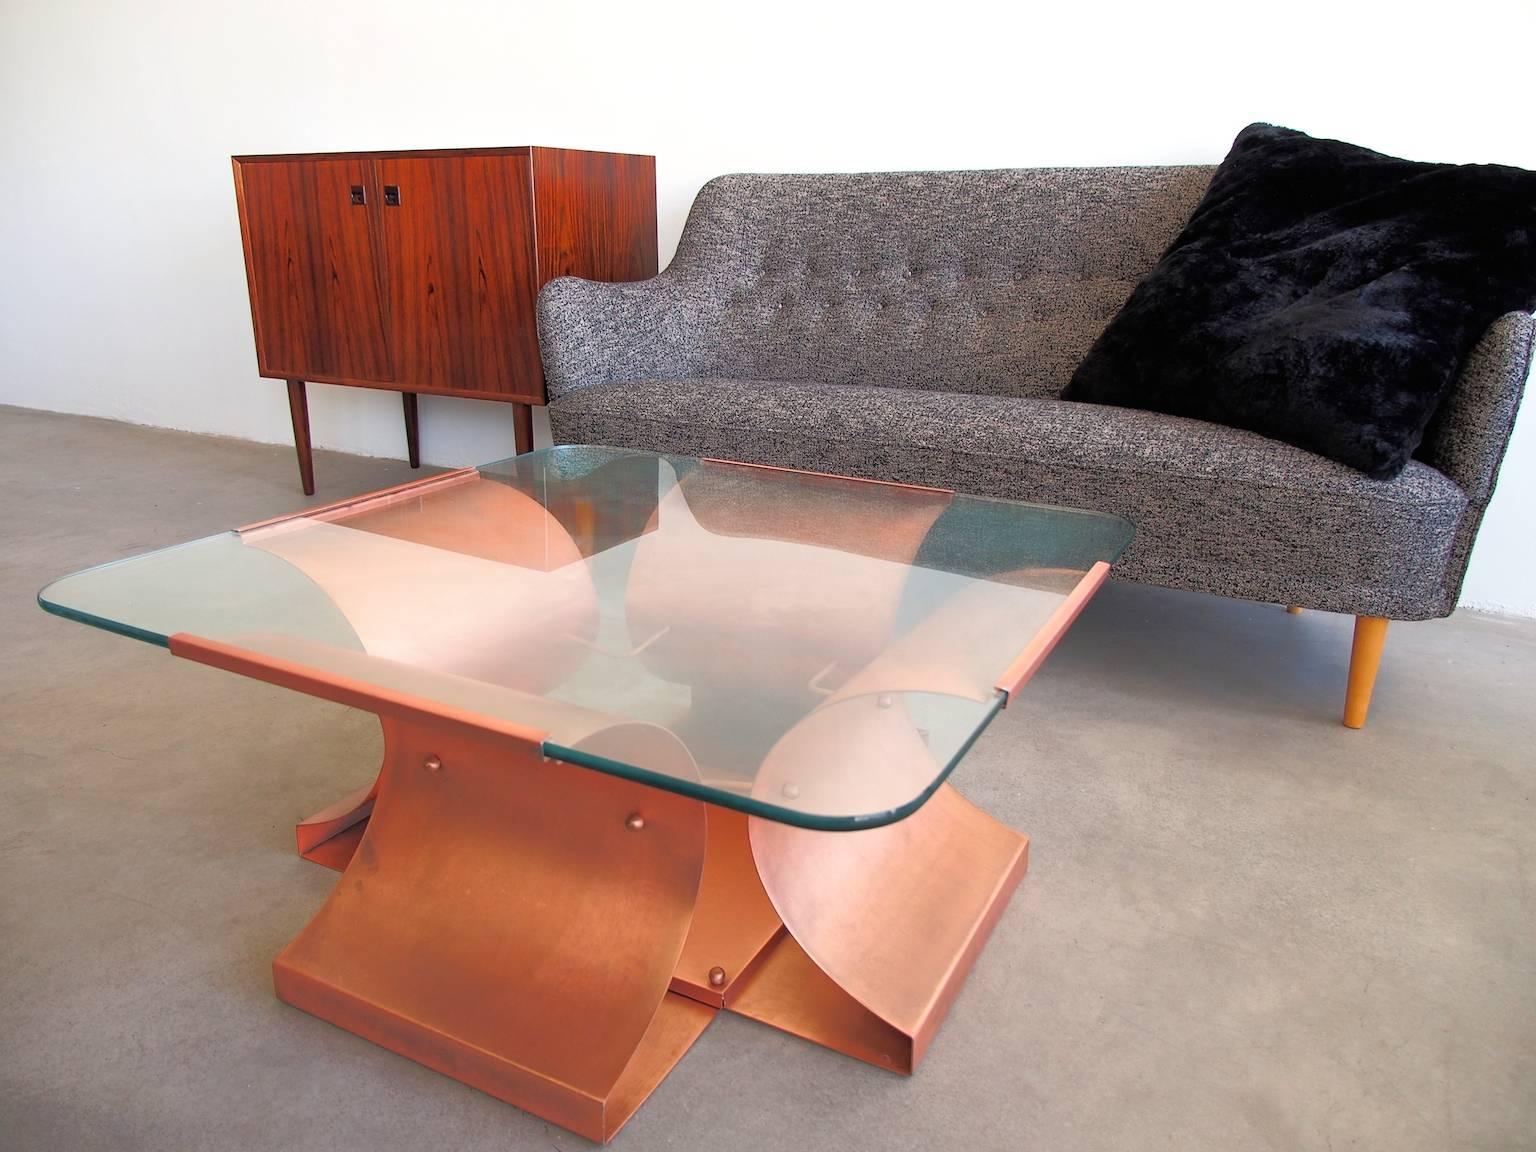 Steel Aged Copper and Glass Coffee Table by Francois Monnet